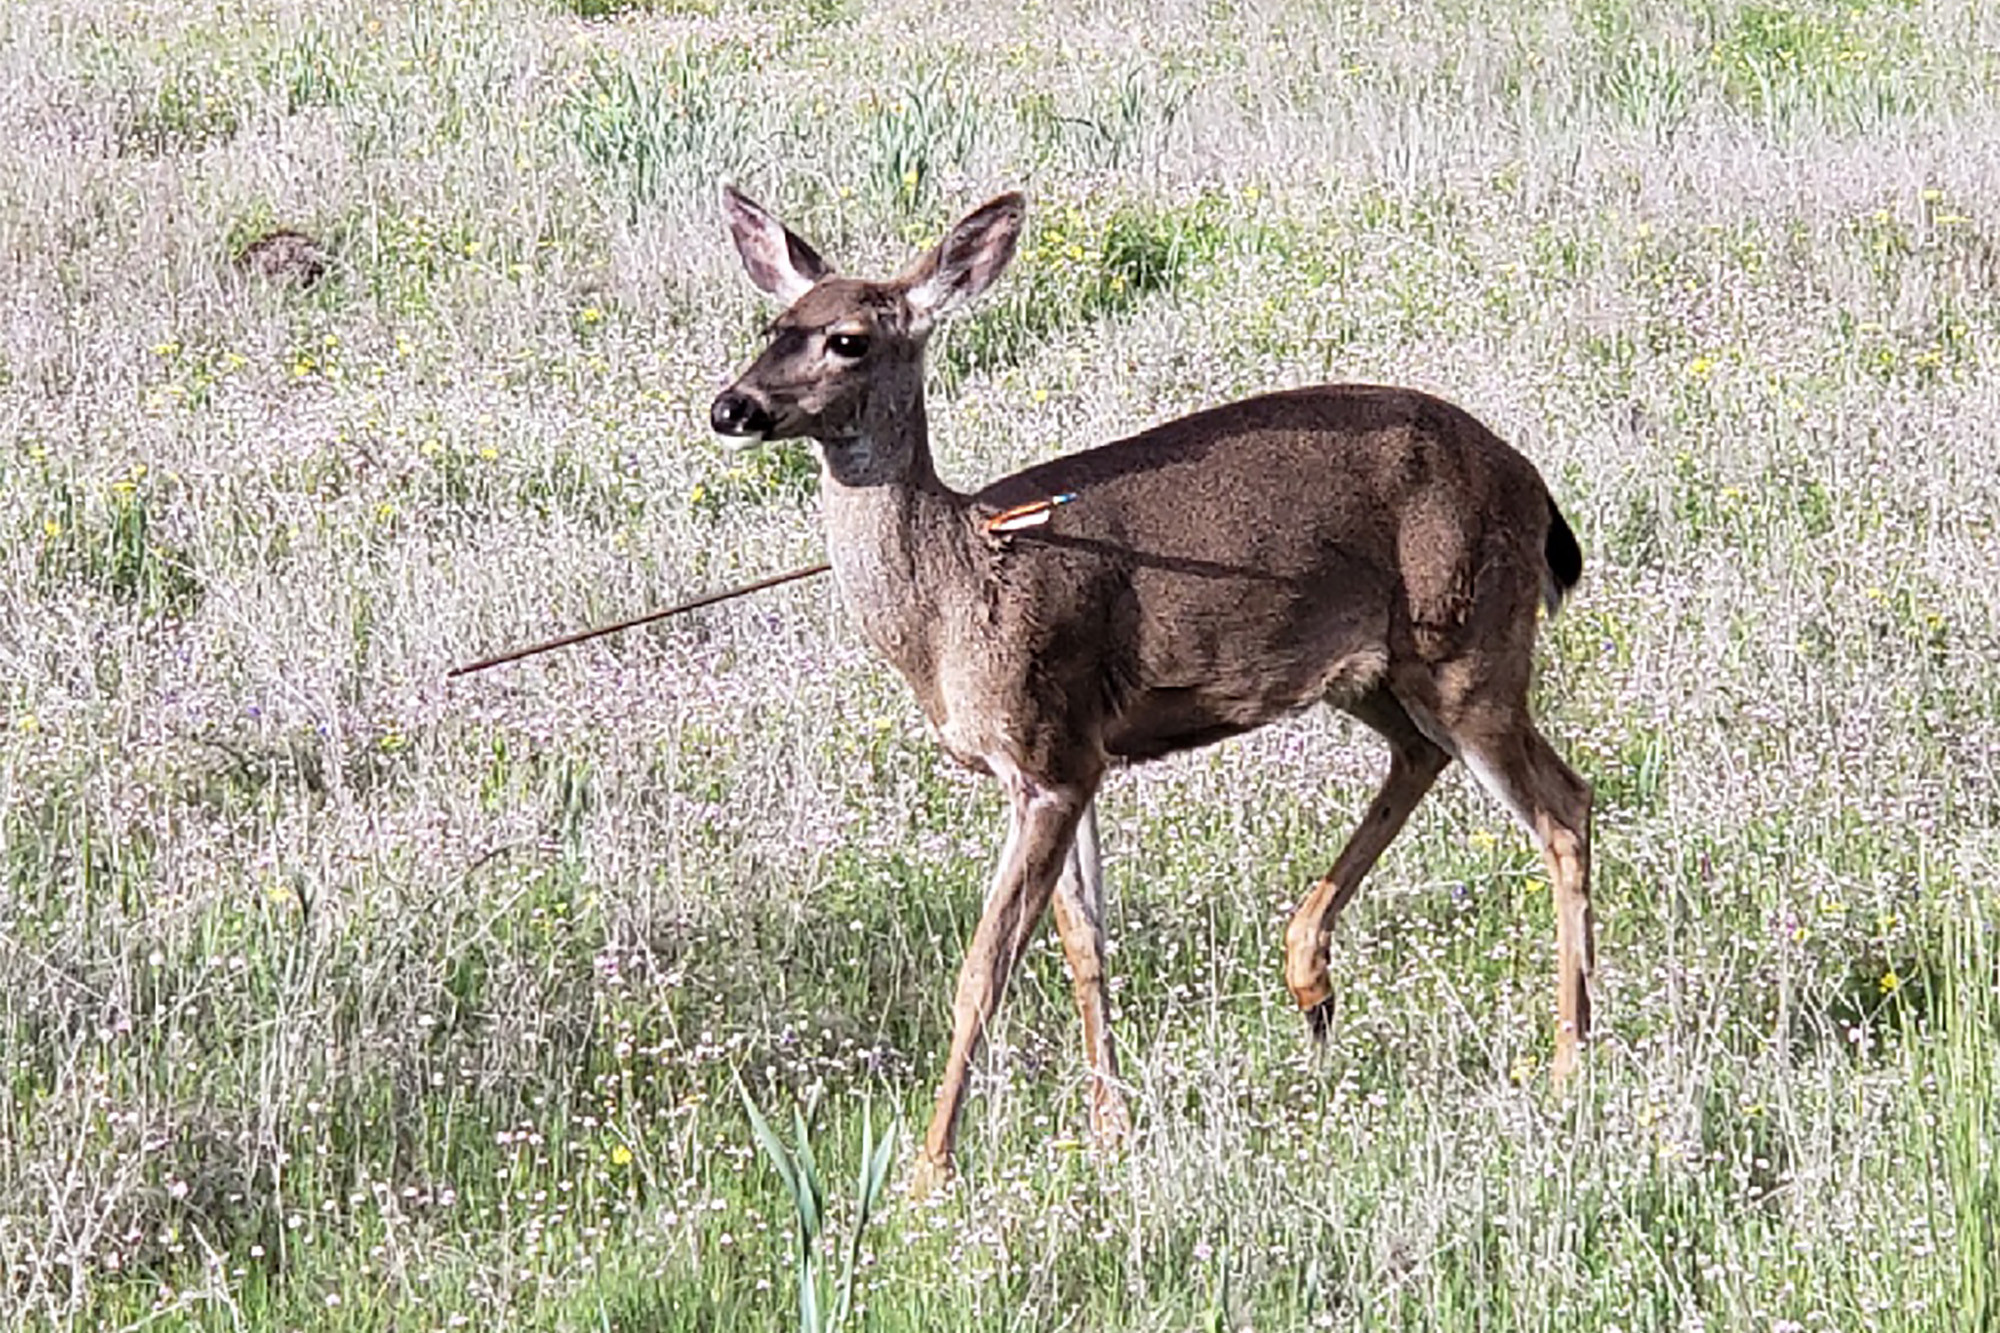 Deer survives arrow to the face